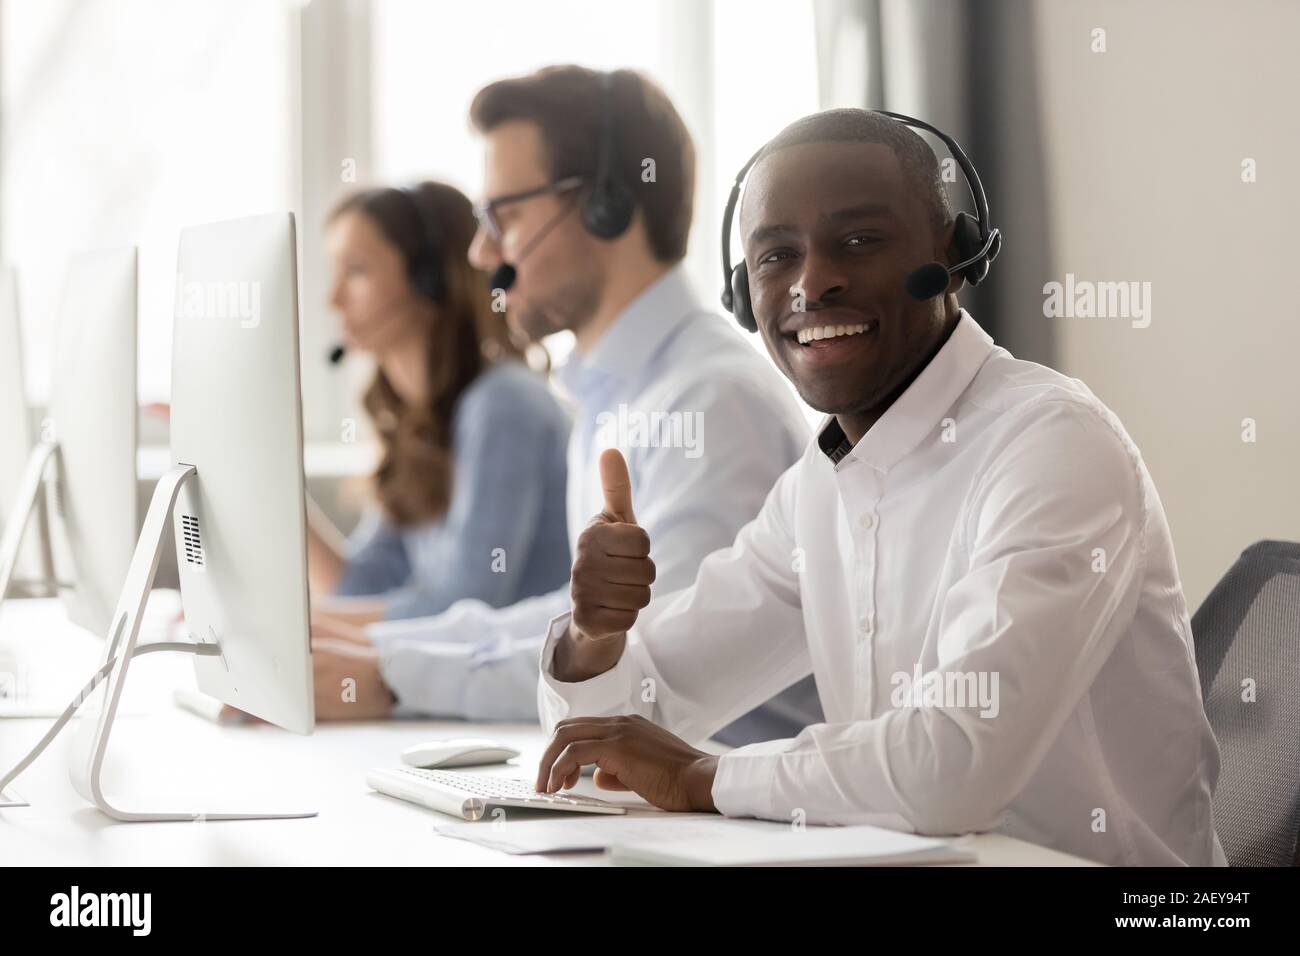 Smiling black operator show thumbs up recommending service Stock Photo